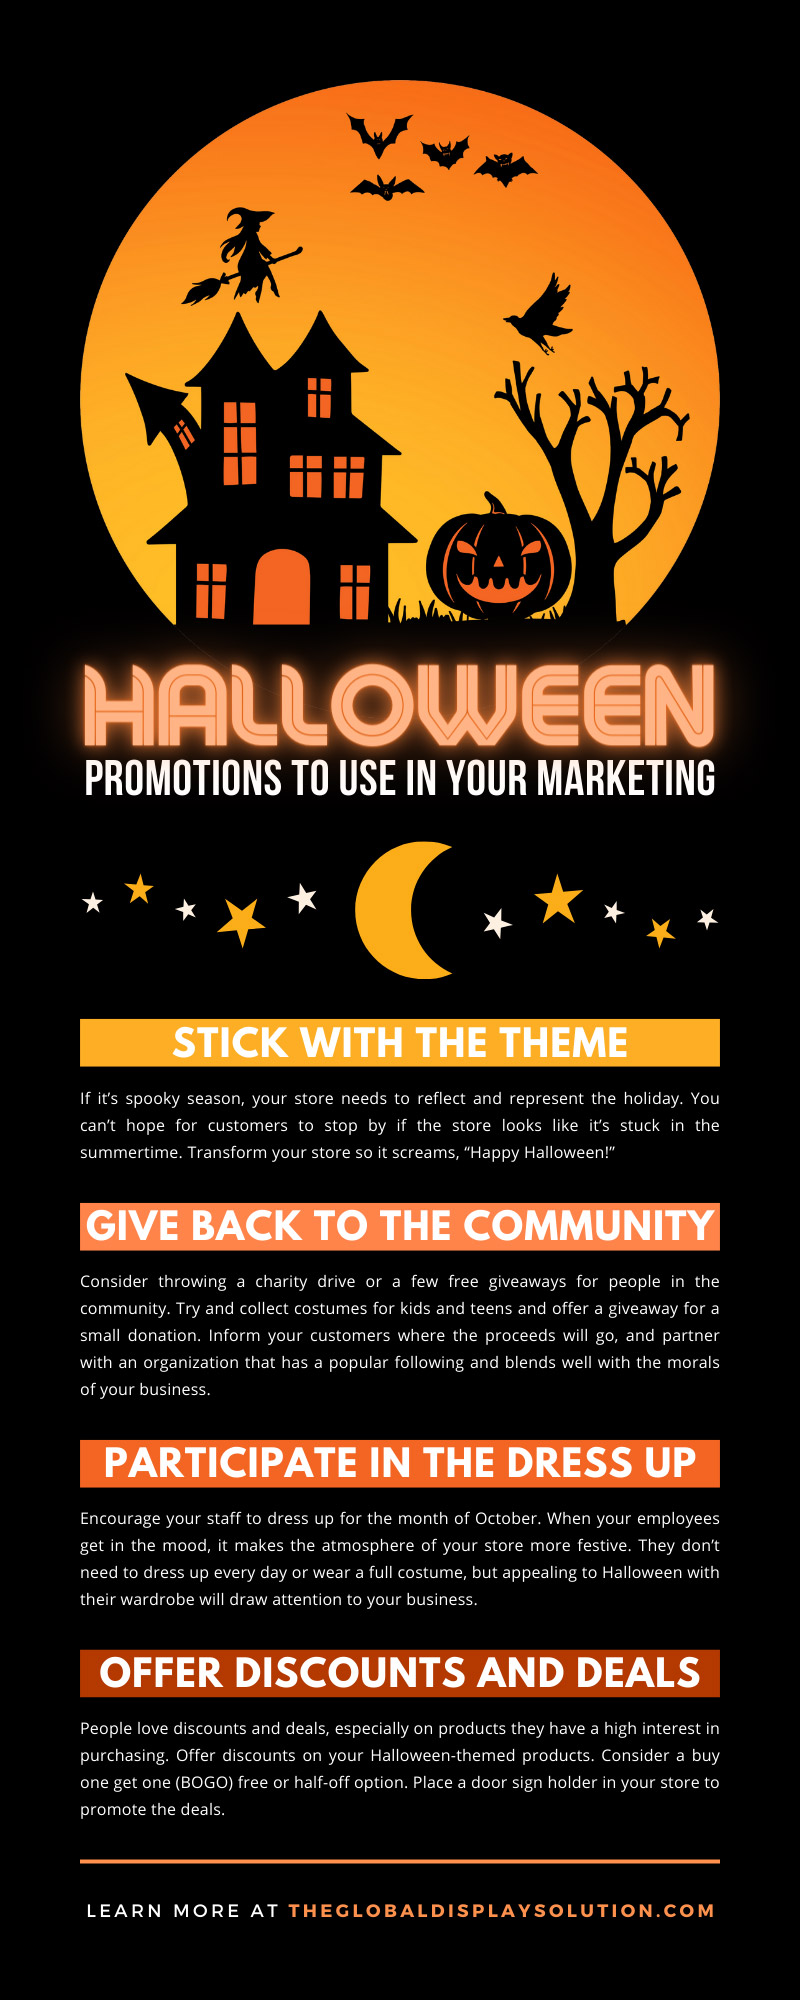 10 Halloween Promotions To Use in Your Marketing